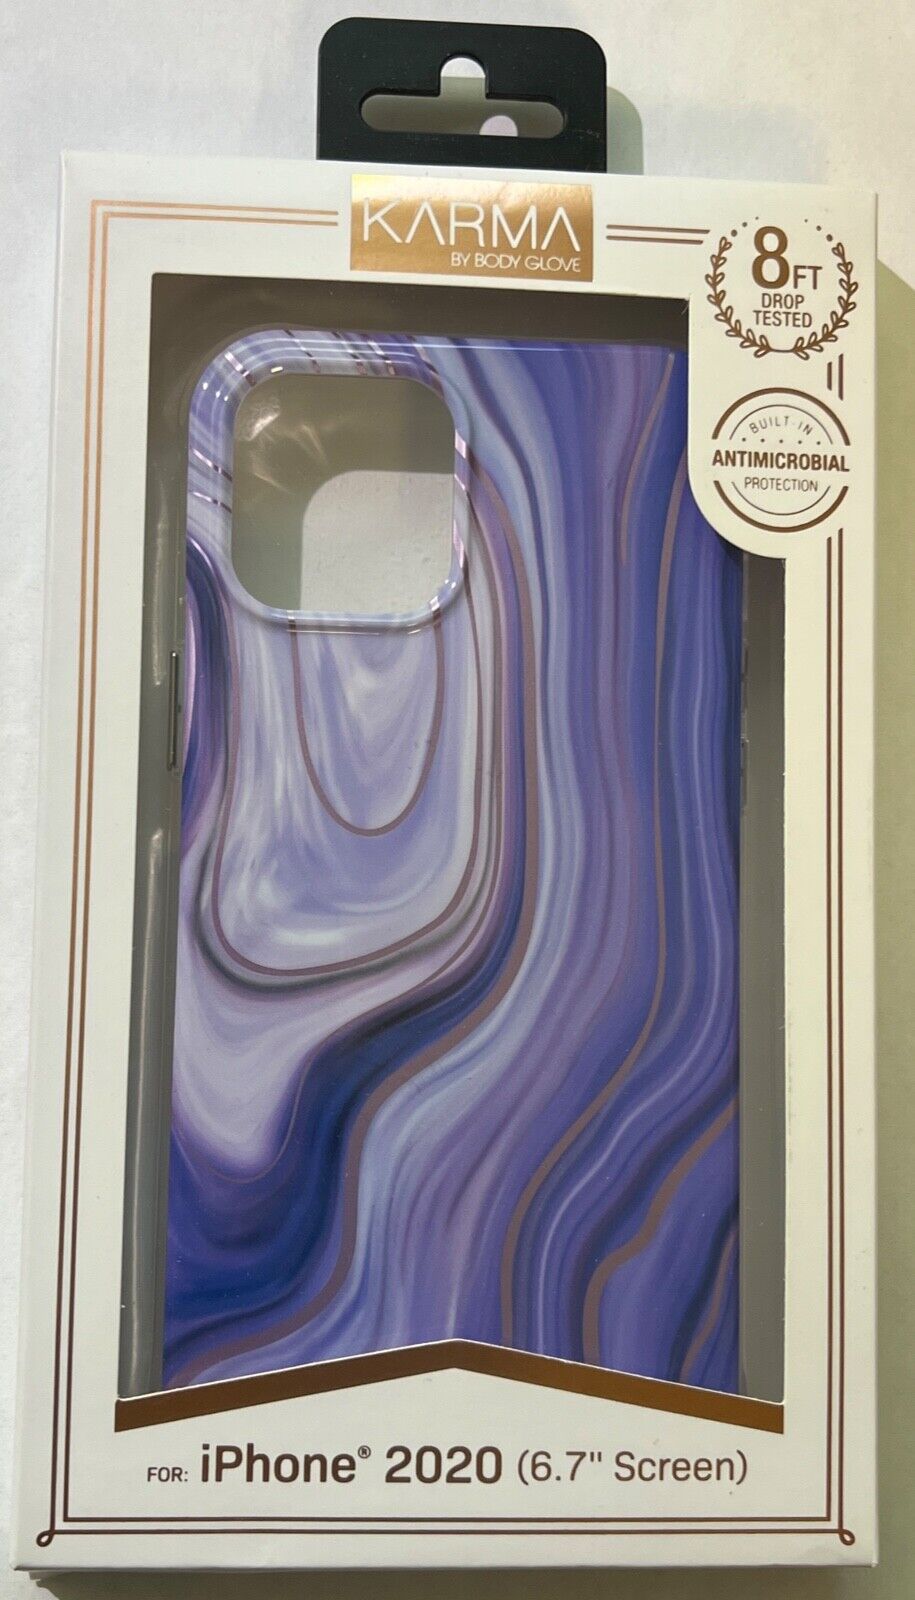 NEW Body Glove Karma Marble Pattern Slim Case for iPhone 12 Pro Max (6.7")